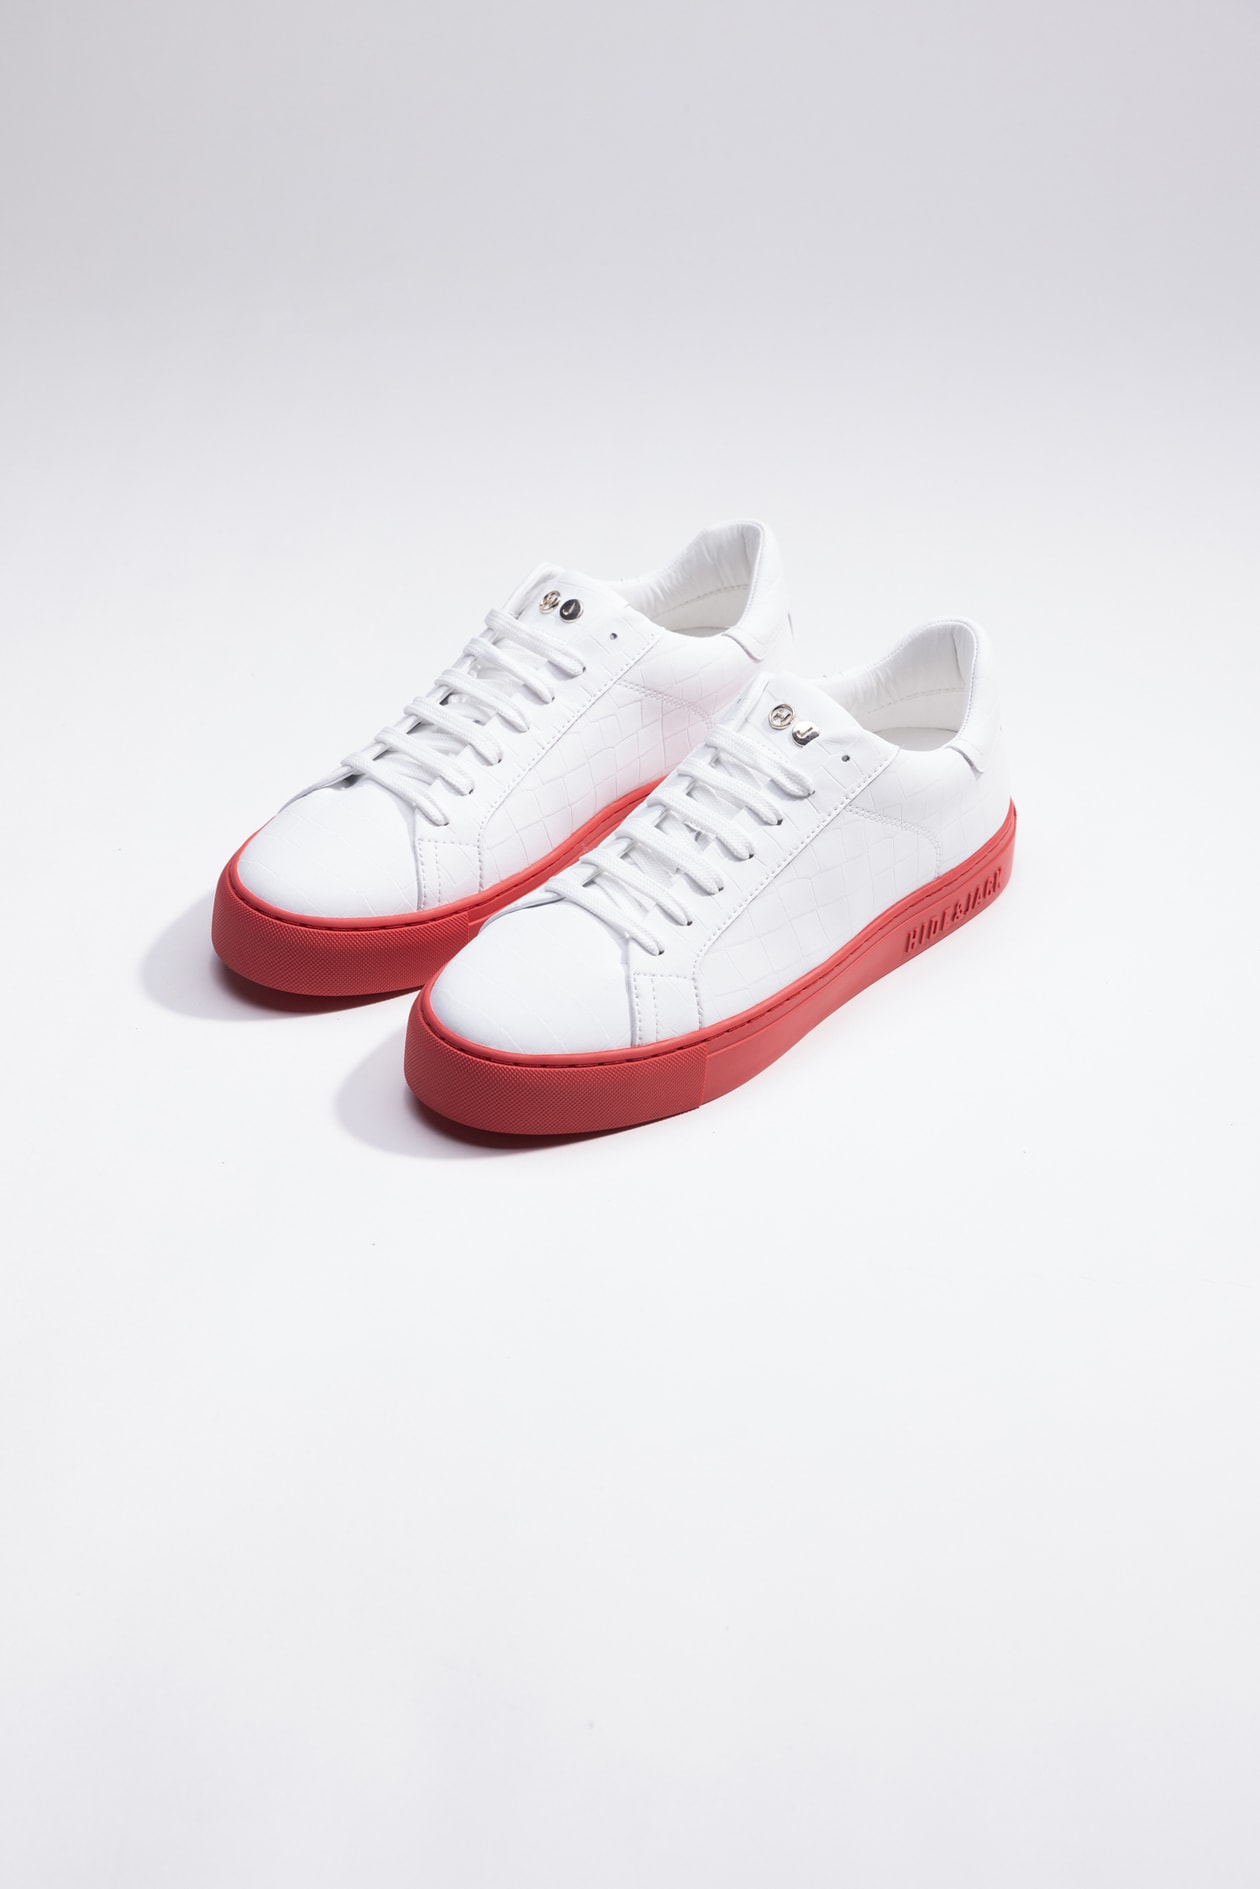 Hide&amp;jack Low Top Trainer - Essence Tuscany White Red